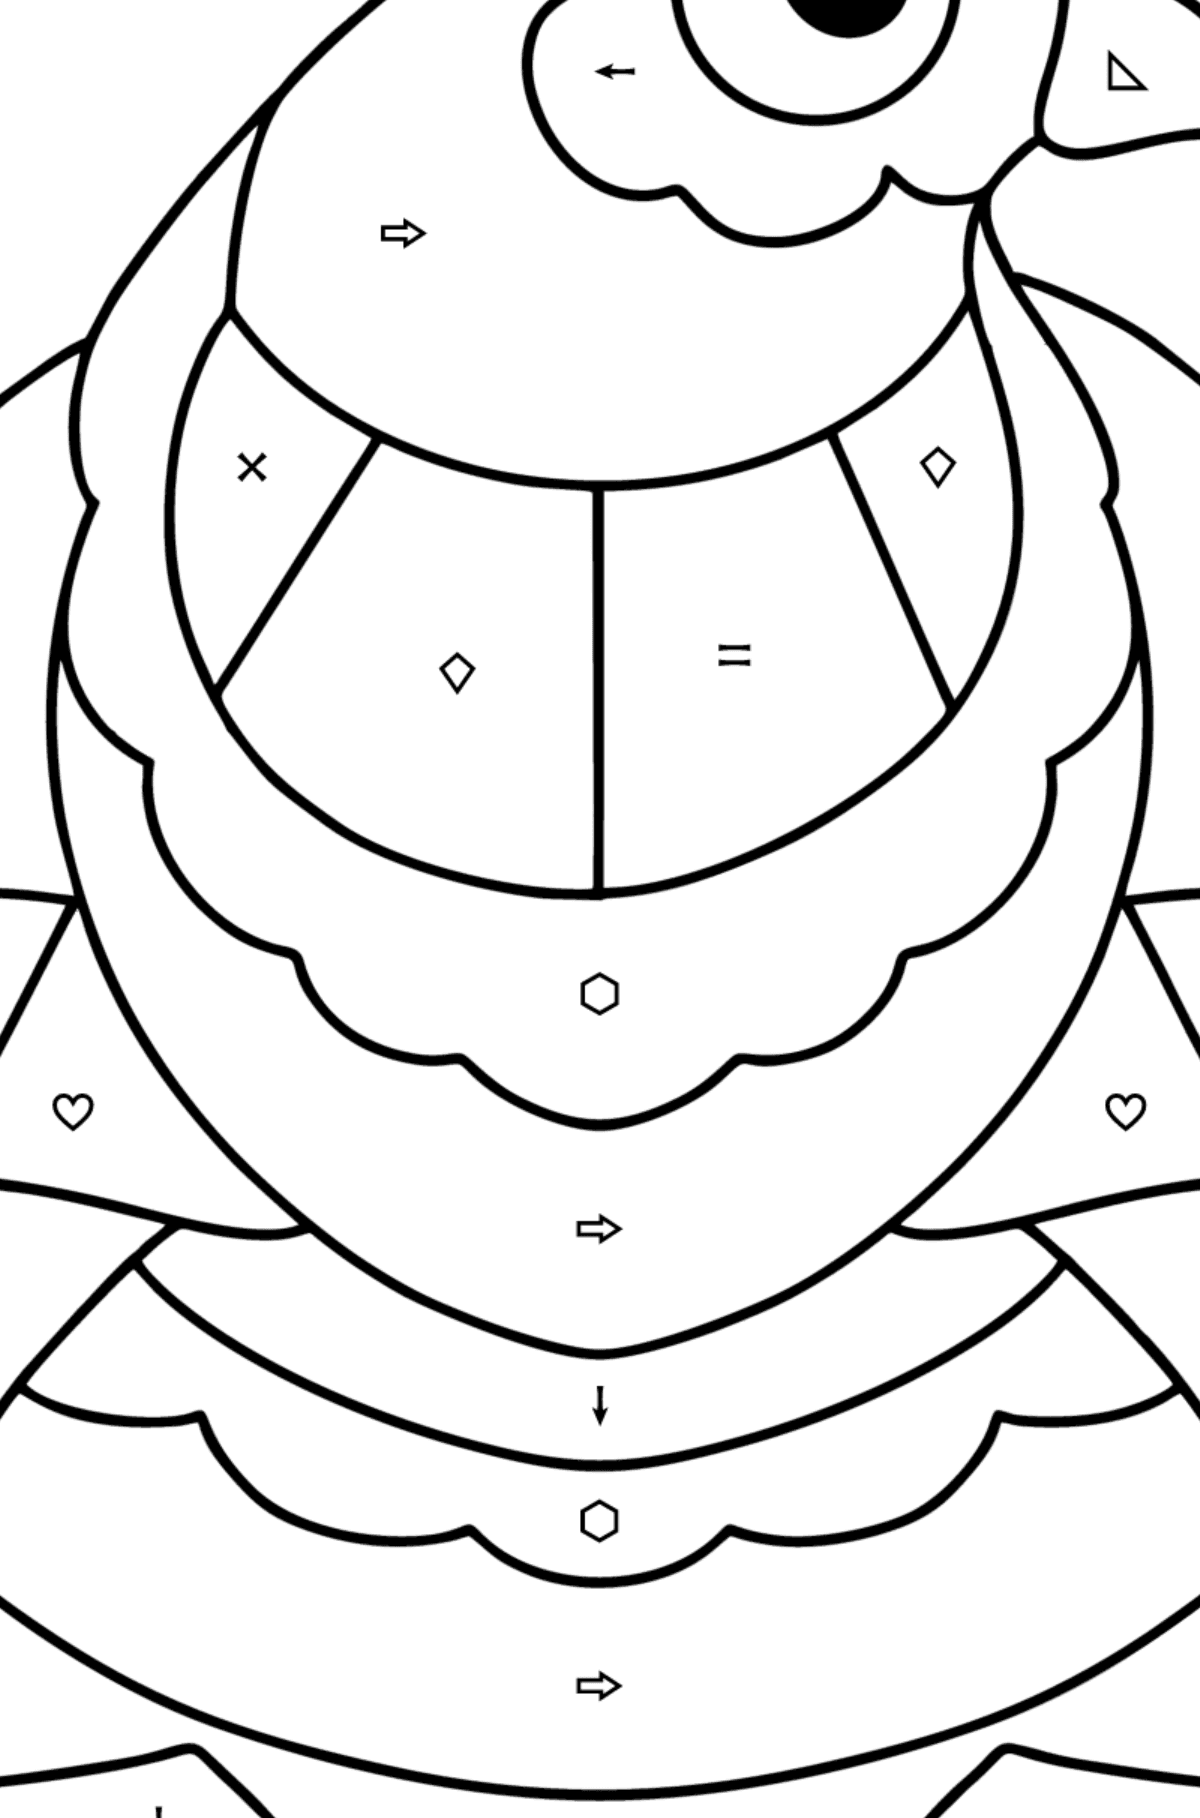 Anti stress pigeon coloring page - Coloring by Symbols and Geometric Shapes for Kids